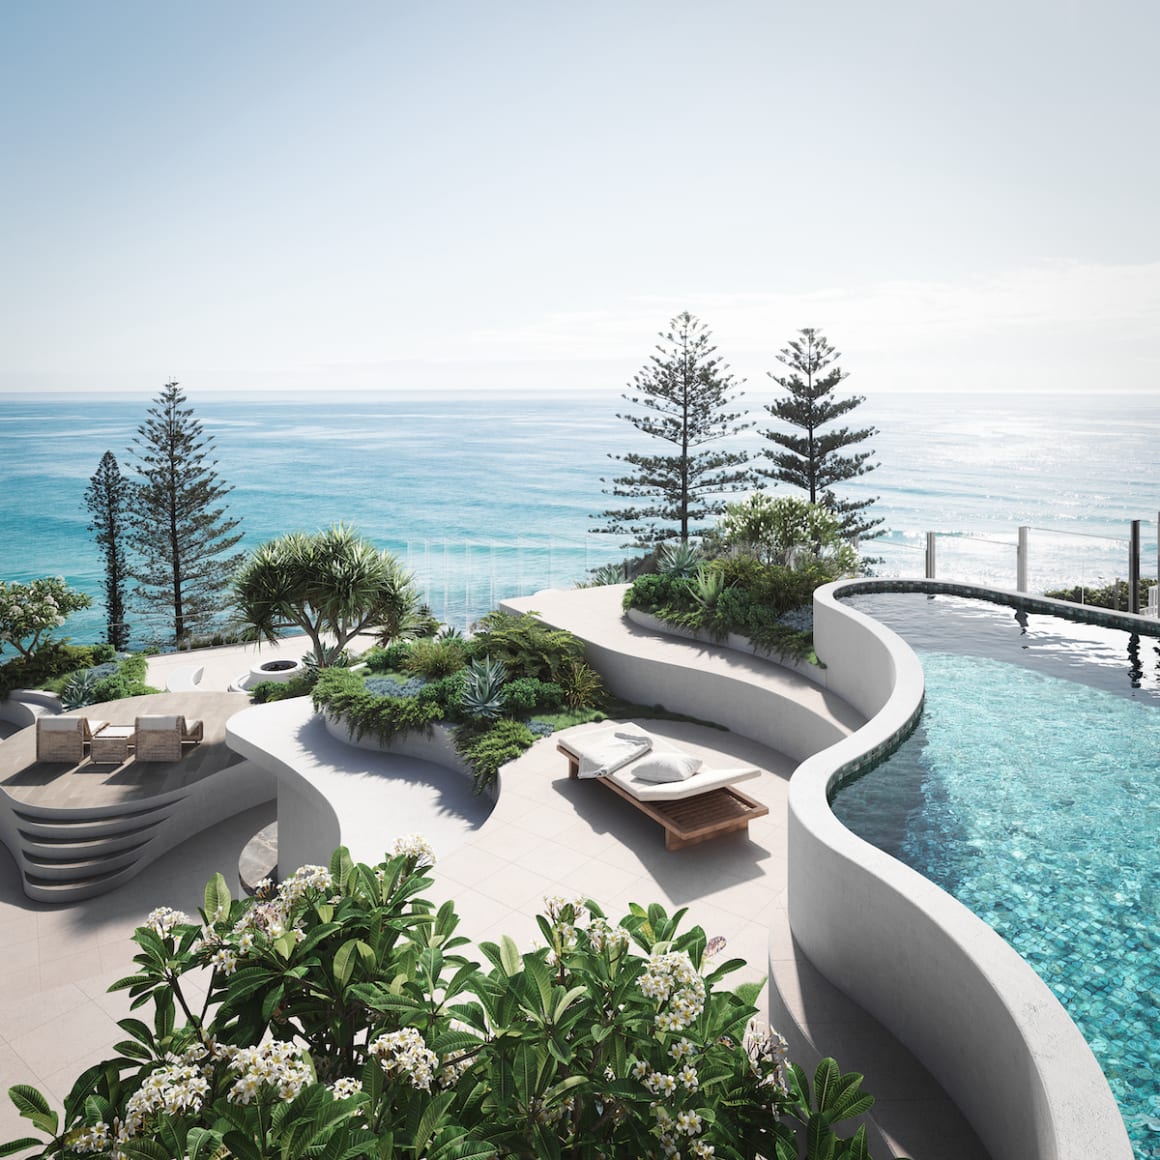 Spyre Group smash Queensland apartment record with $20 million Burleigh Heads penthouse sale